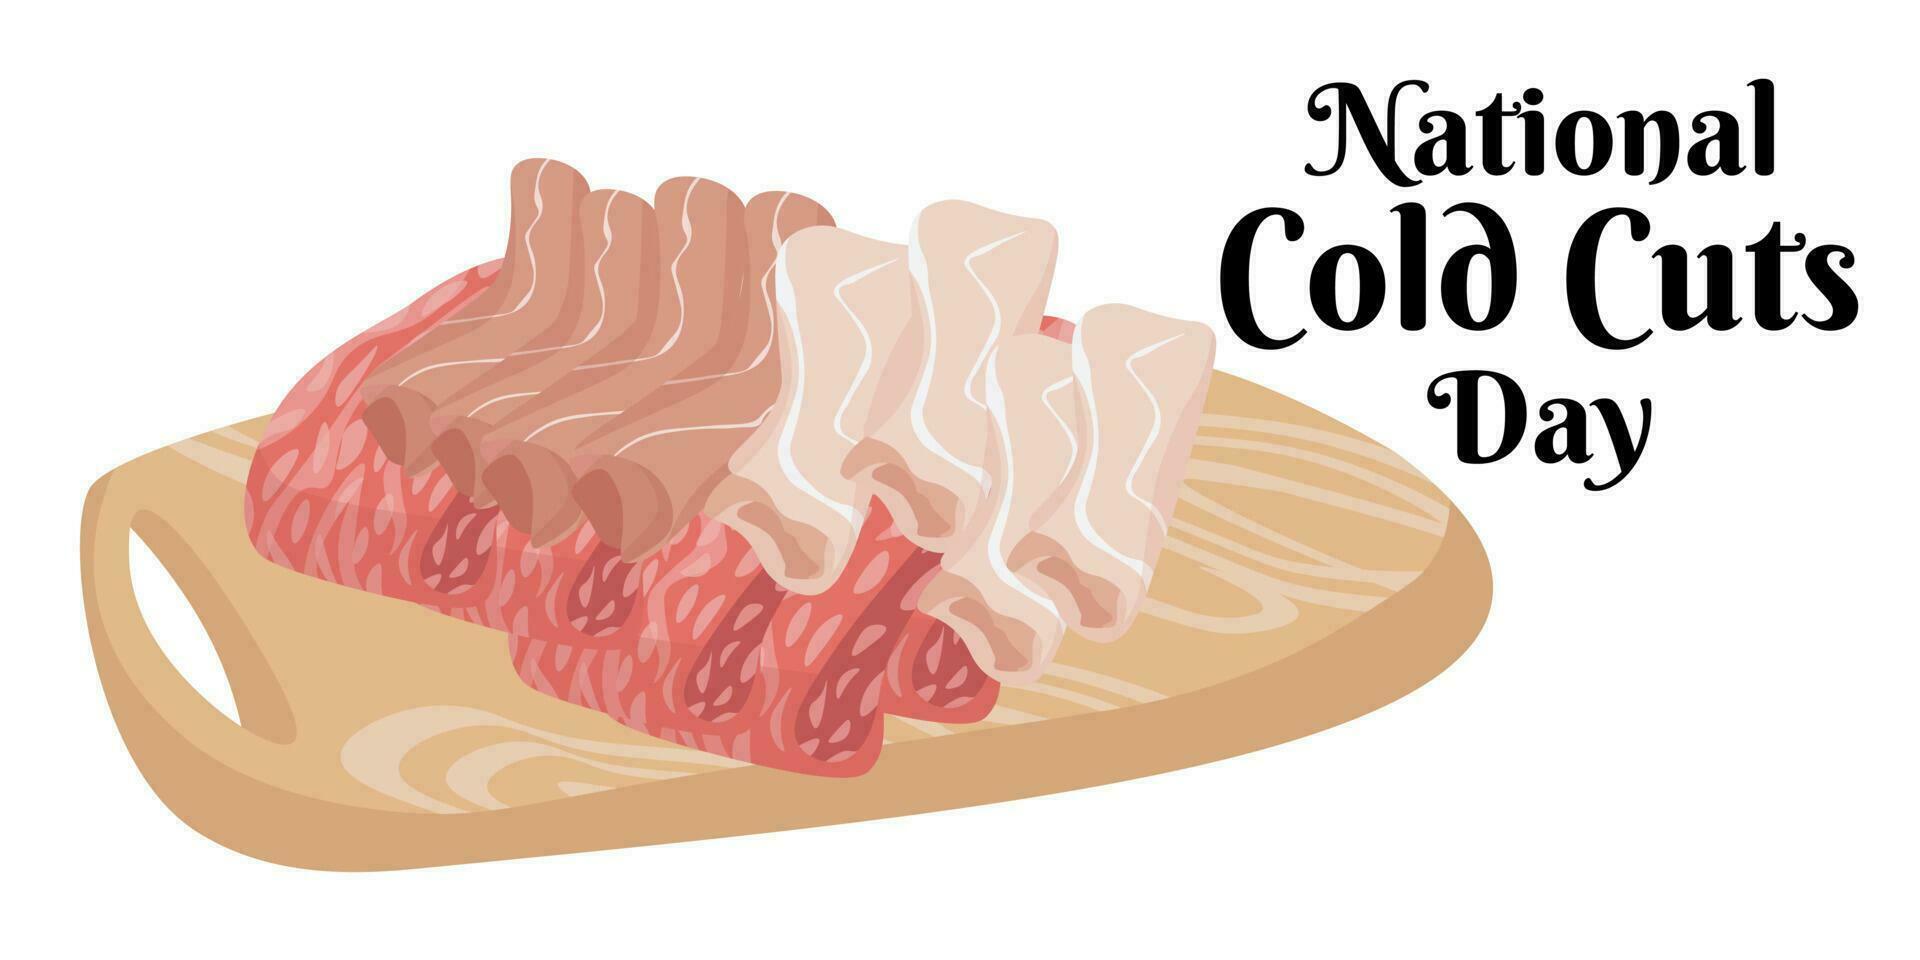 National Cold Cuts Day, idea for a horizontal design for an event or menu design vector